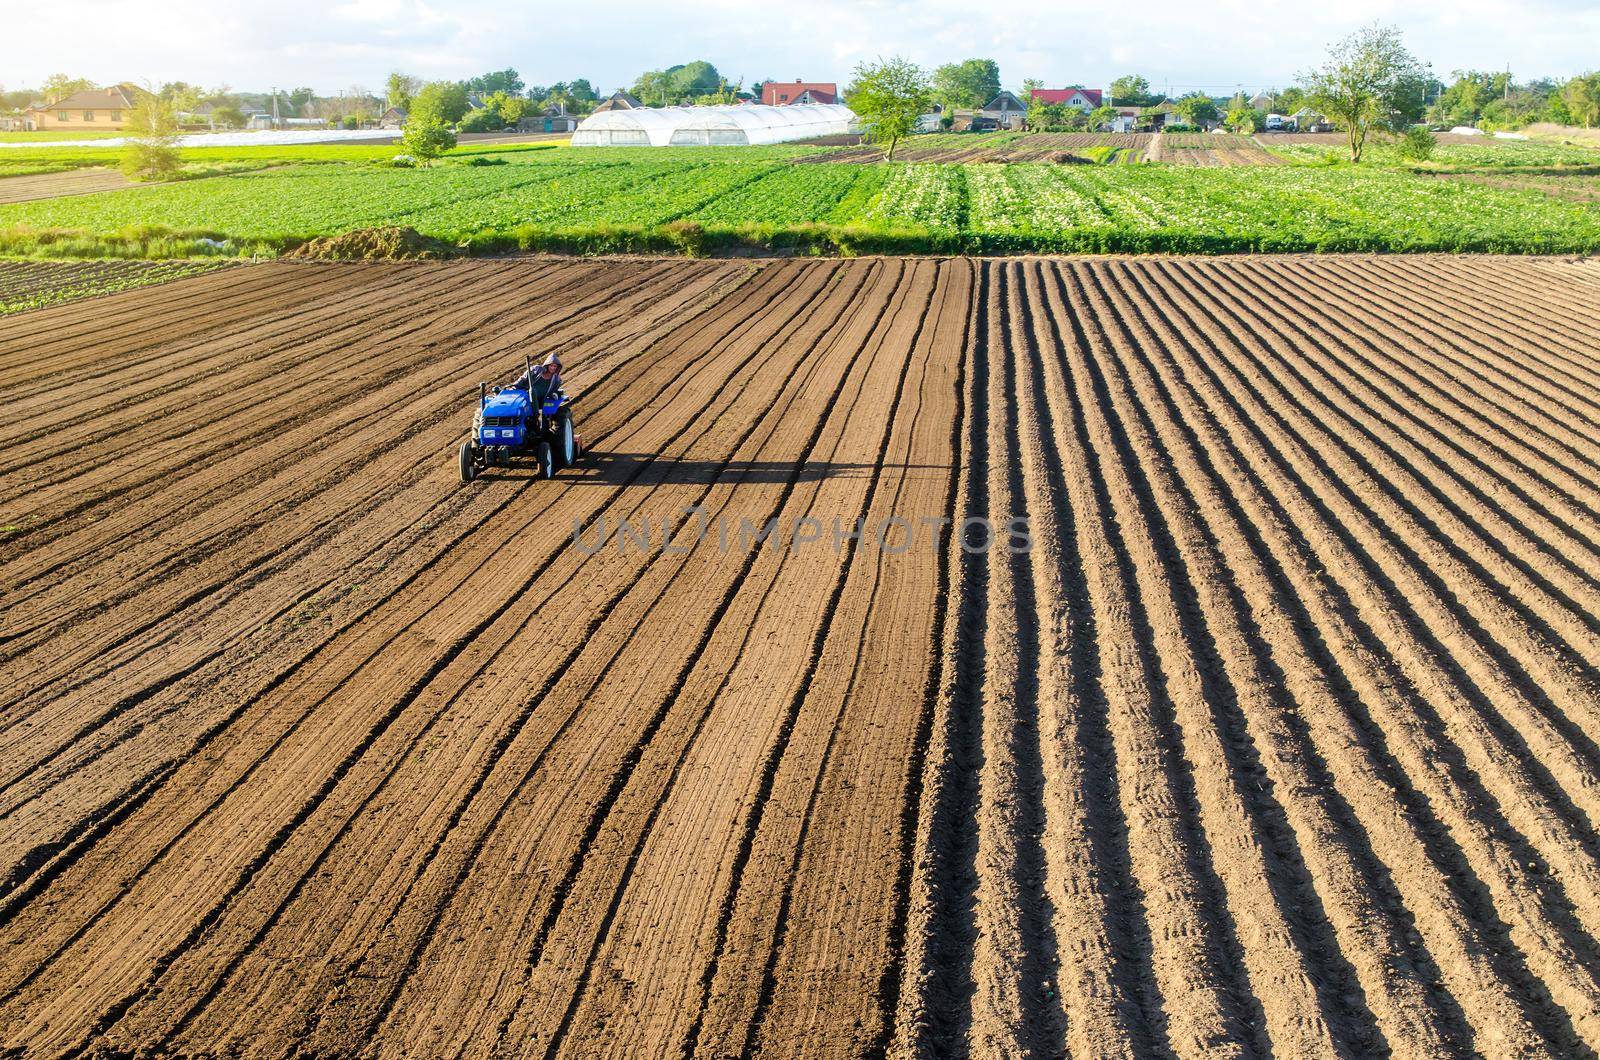 Tractor on farmland field. Farm work. Milling soil, Softening the soil before planting new crops. Plowing. Loosening surface, land cultivation. Mechanization in agriculture. Cutting rows for planting.